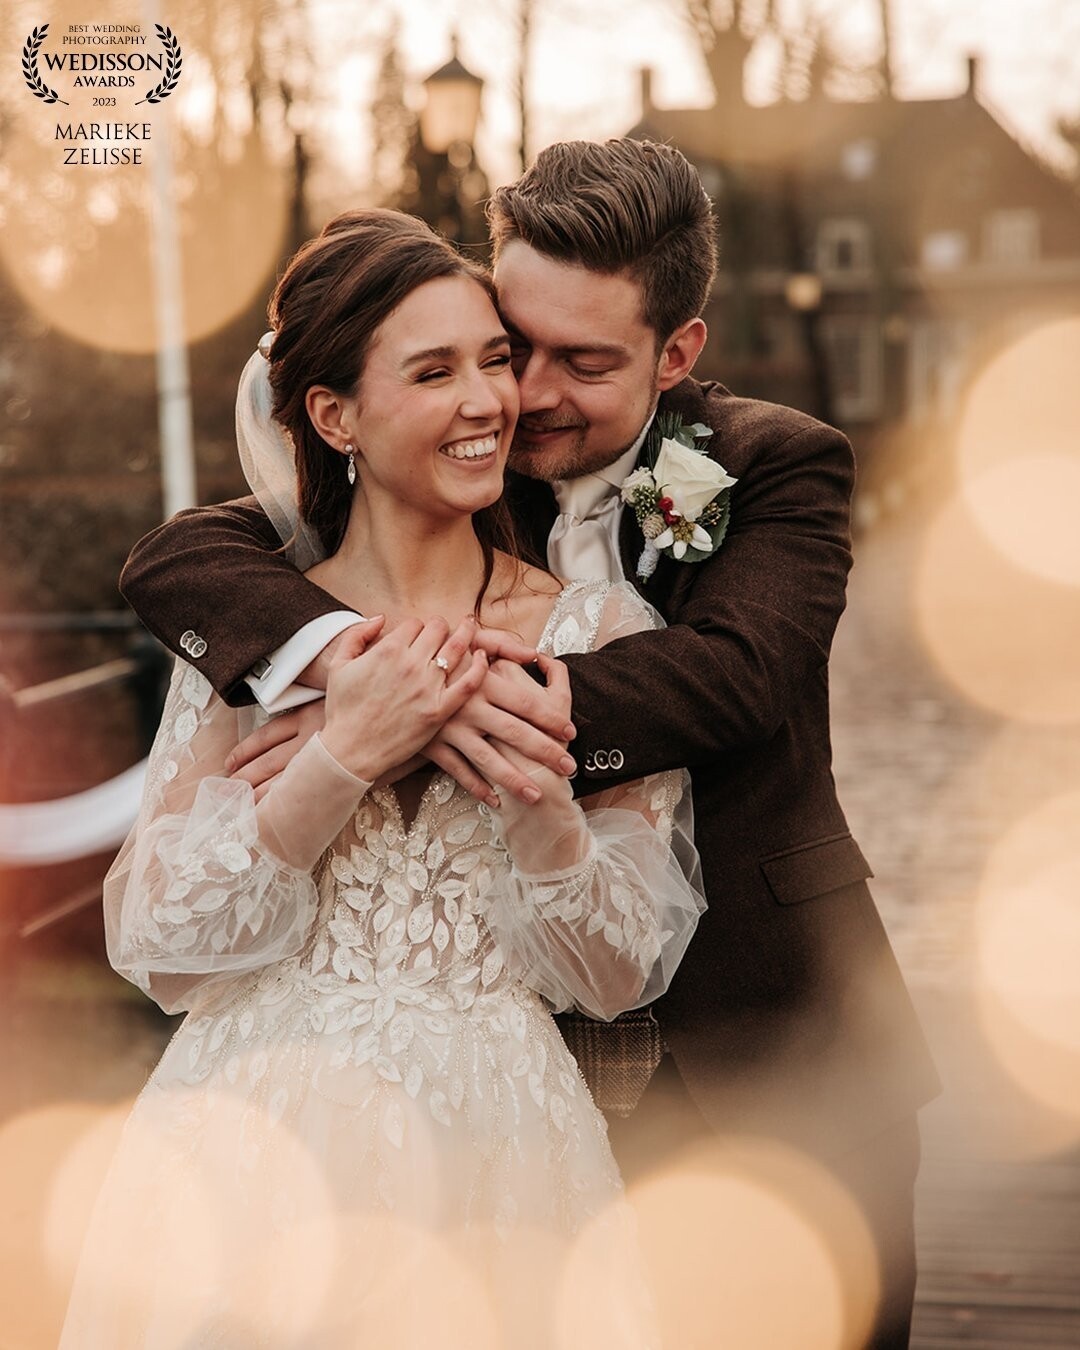 This was a special Christmas wedding, and ofcourse I will always help to get the wedding theme also in the pictures! So with sundown and an extra little bit of spark, TADA!